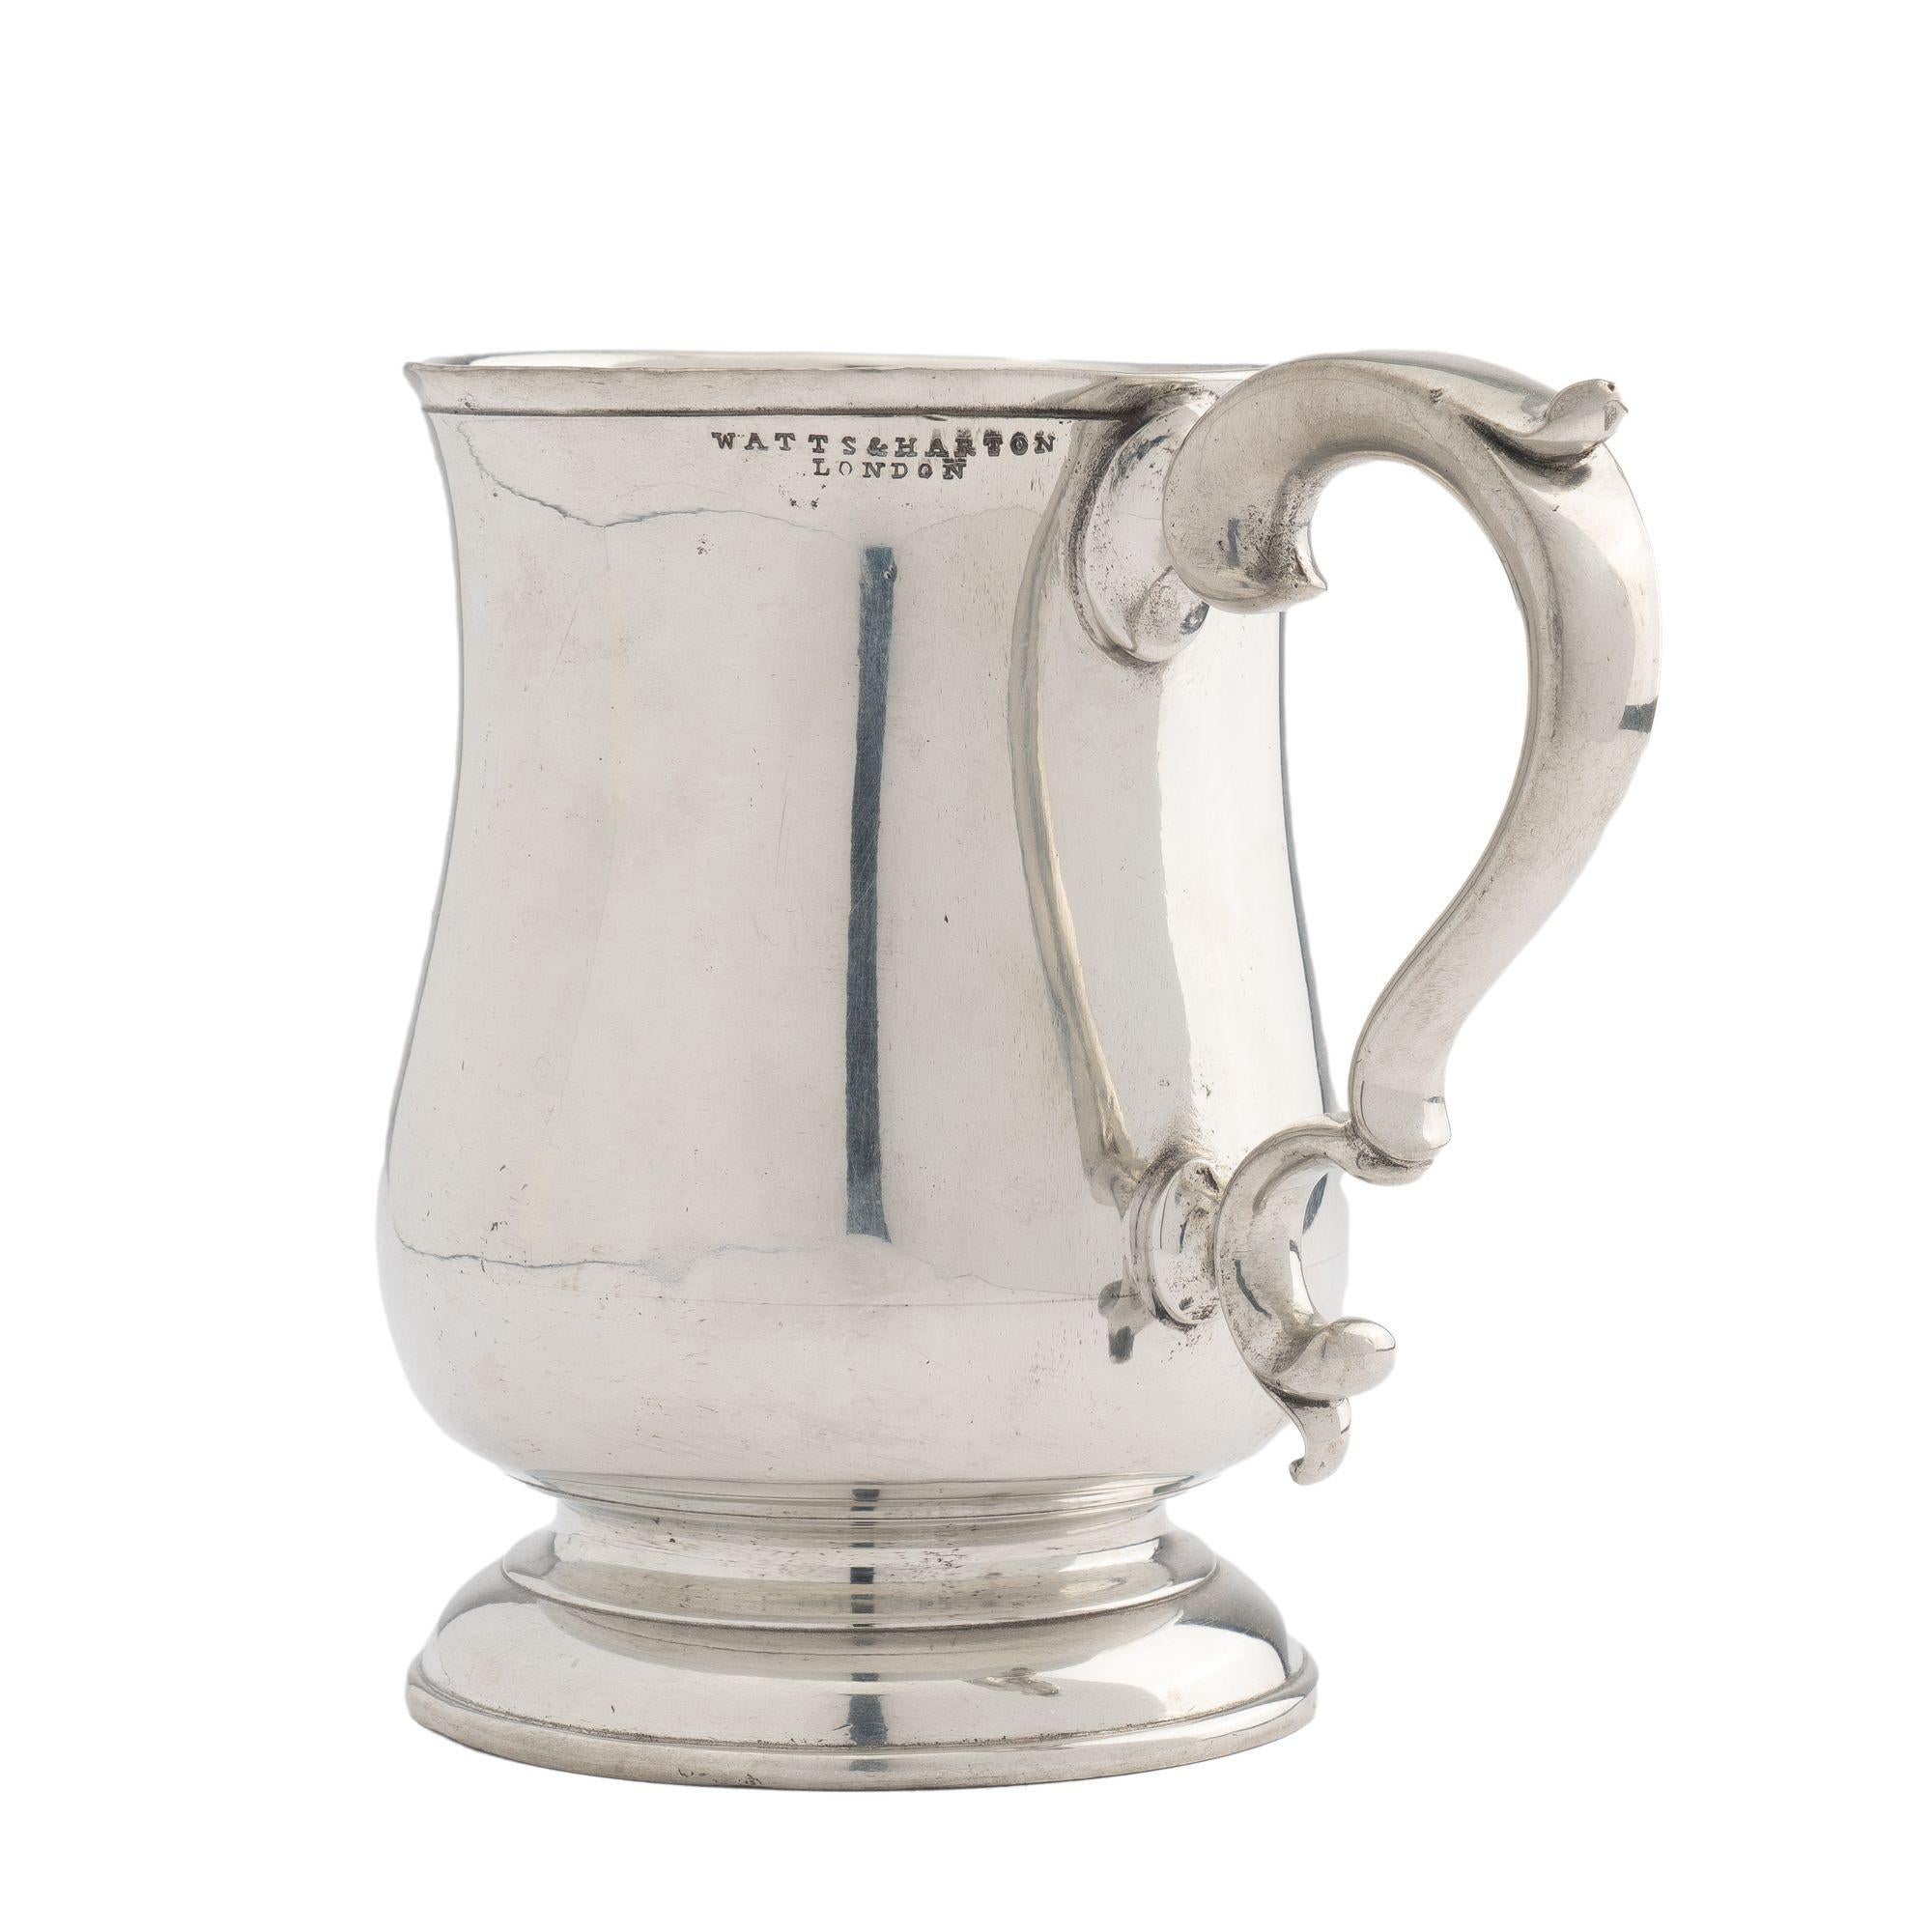 Tulip shaped polished pewter mug with applied scroll handle. Impressed on the rim: Pint, Watts & Harton, London

England, circa 1830.

Condition: Superficial surface crazing emanating from the applied handle attachments, horizontally from 1/2